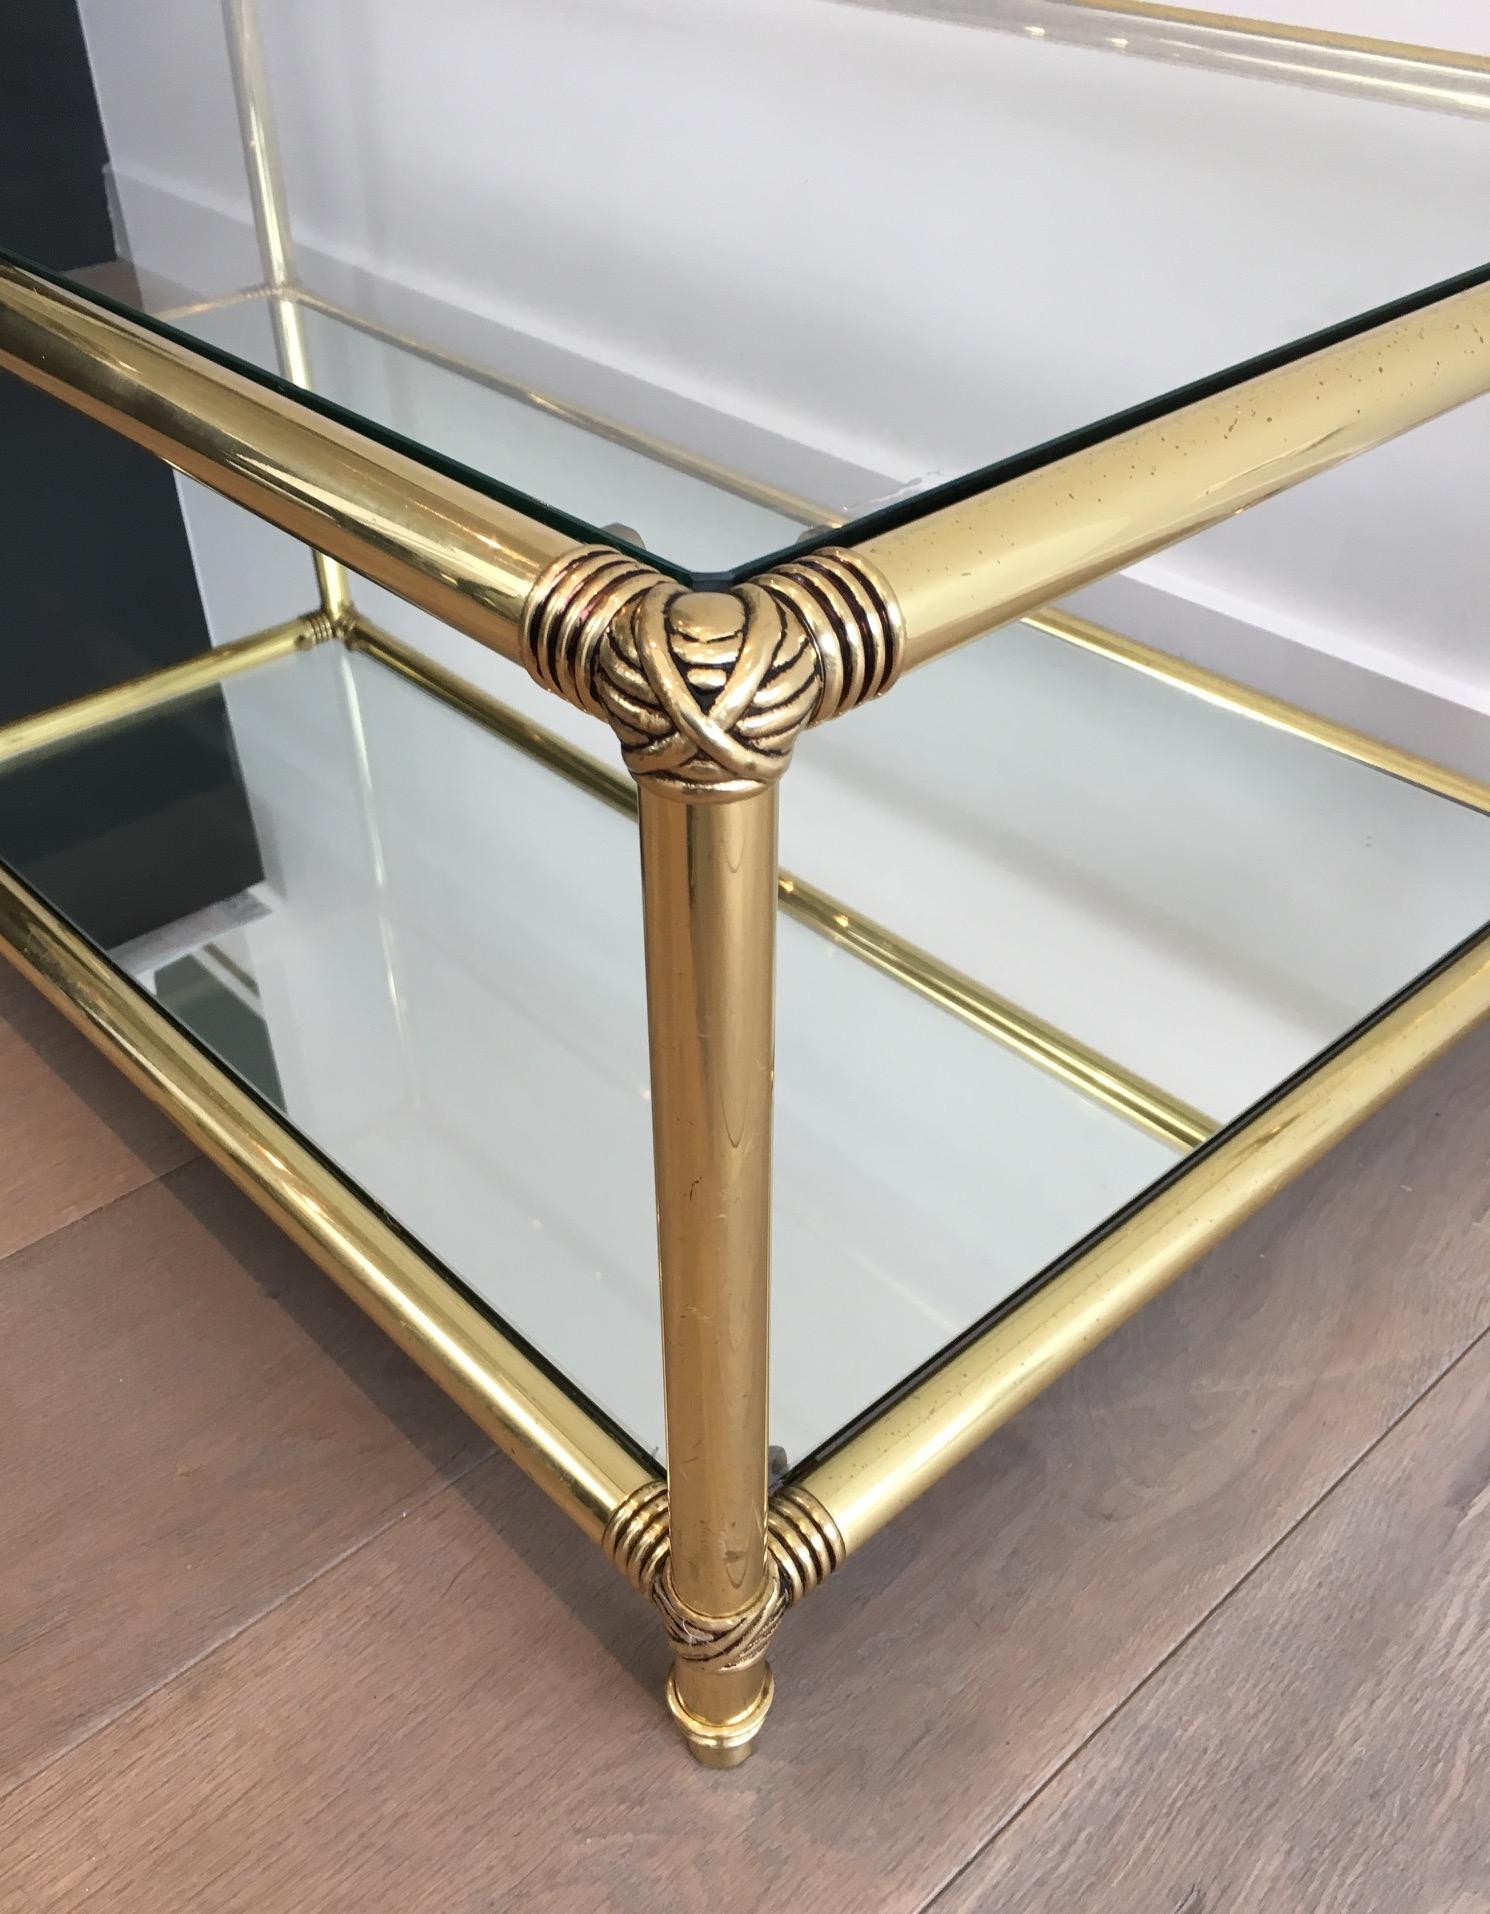 Mid-Century Modern Brass Coffee Table with Brass Noodles on Corners, Clear Glass Shelf on Top and